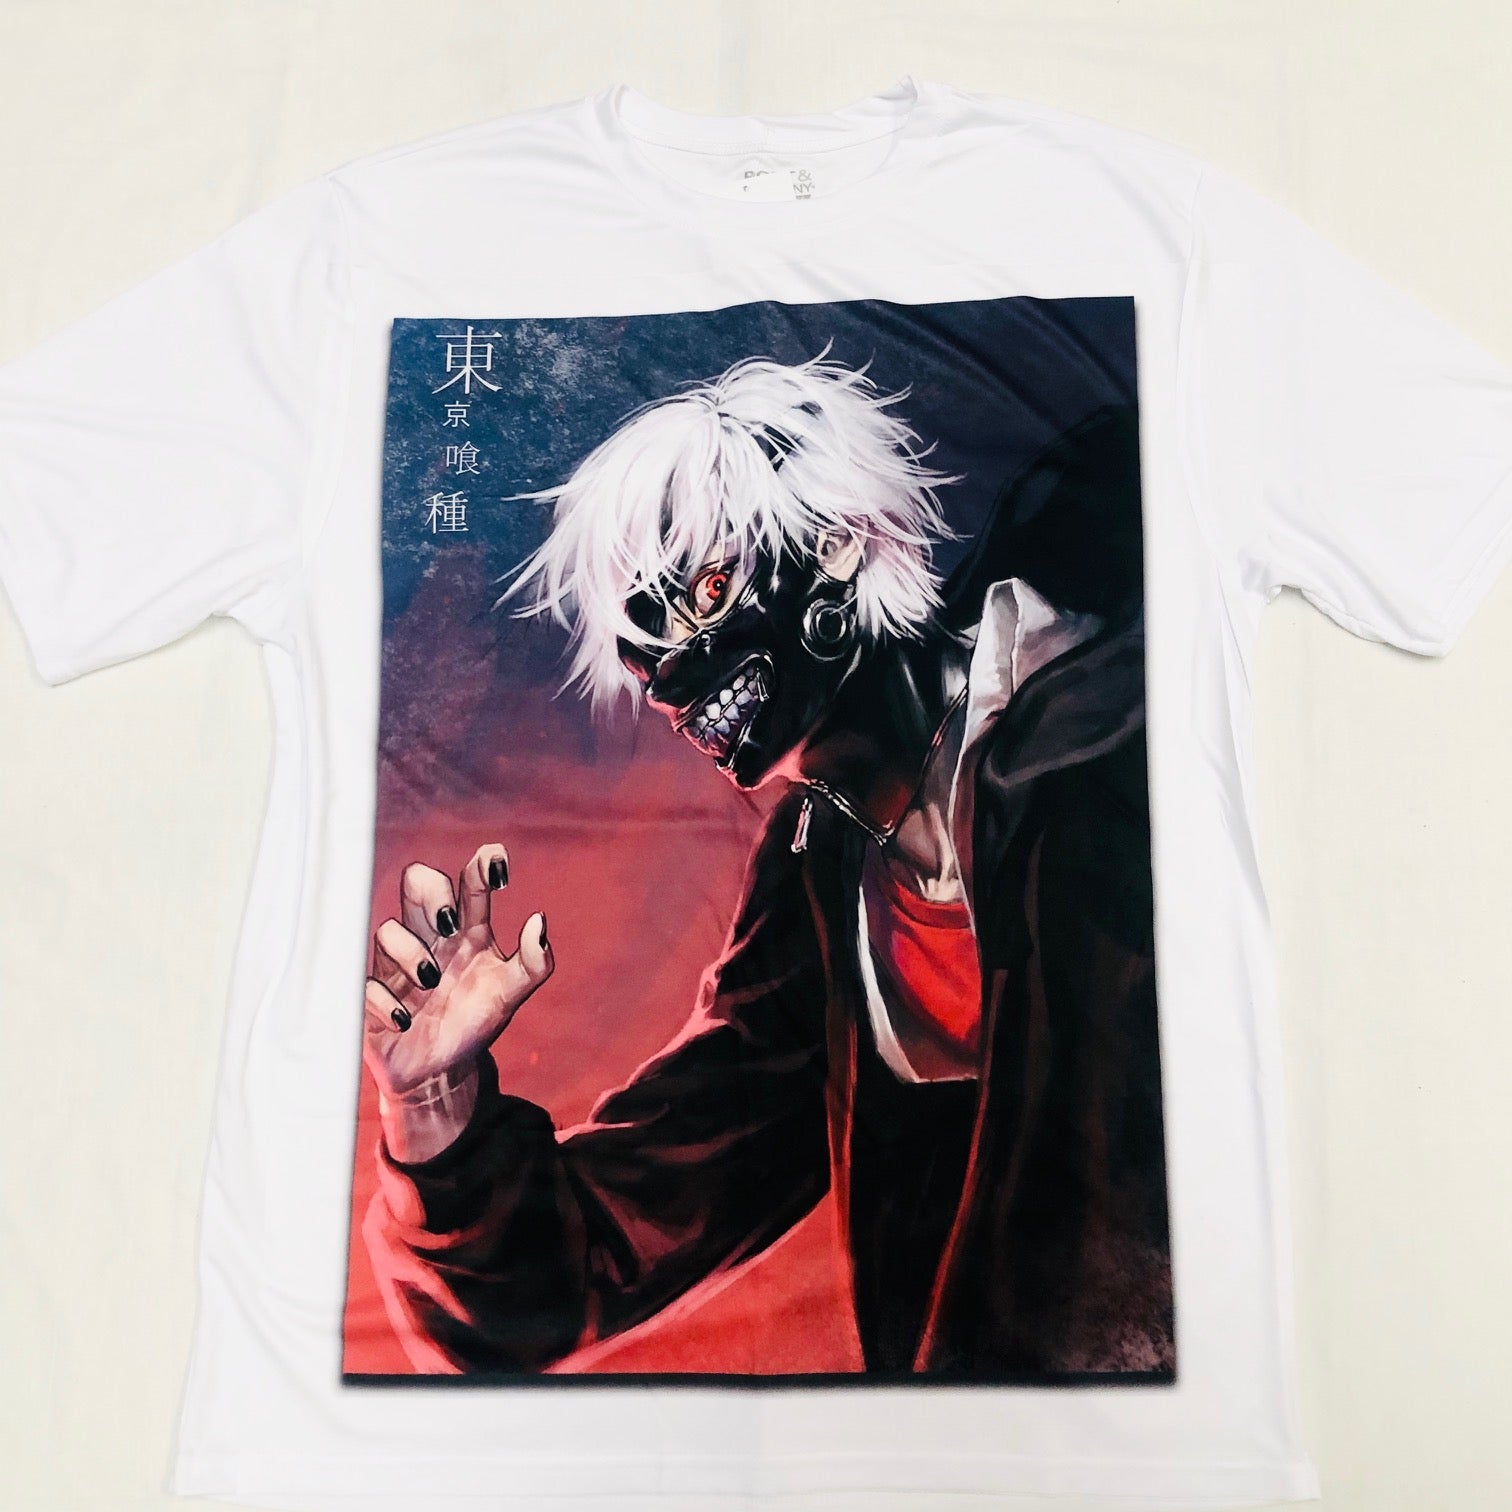 Anime Tokyo Ghoul T-Shirt - Super Anime Store FREE SHIPPING FAST SHIPPING USA